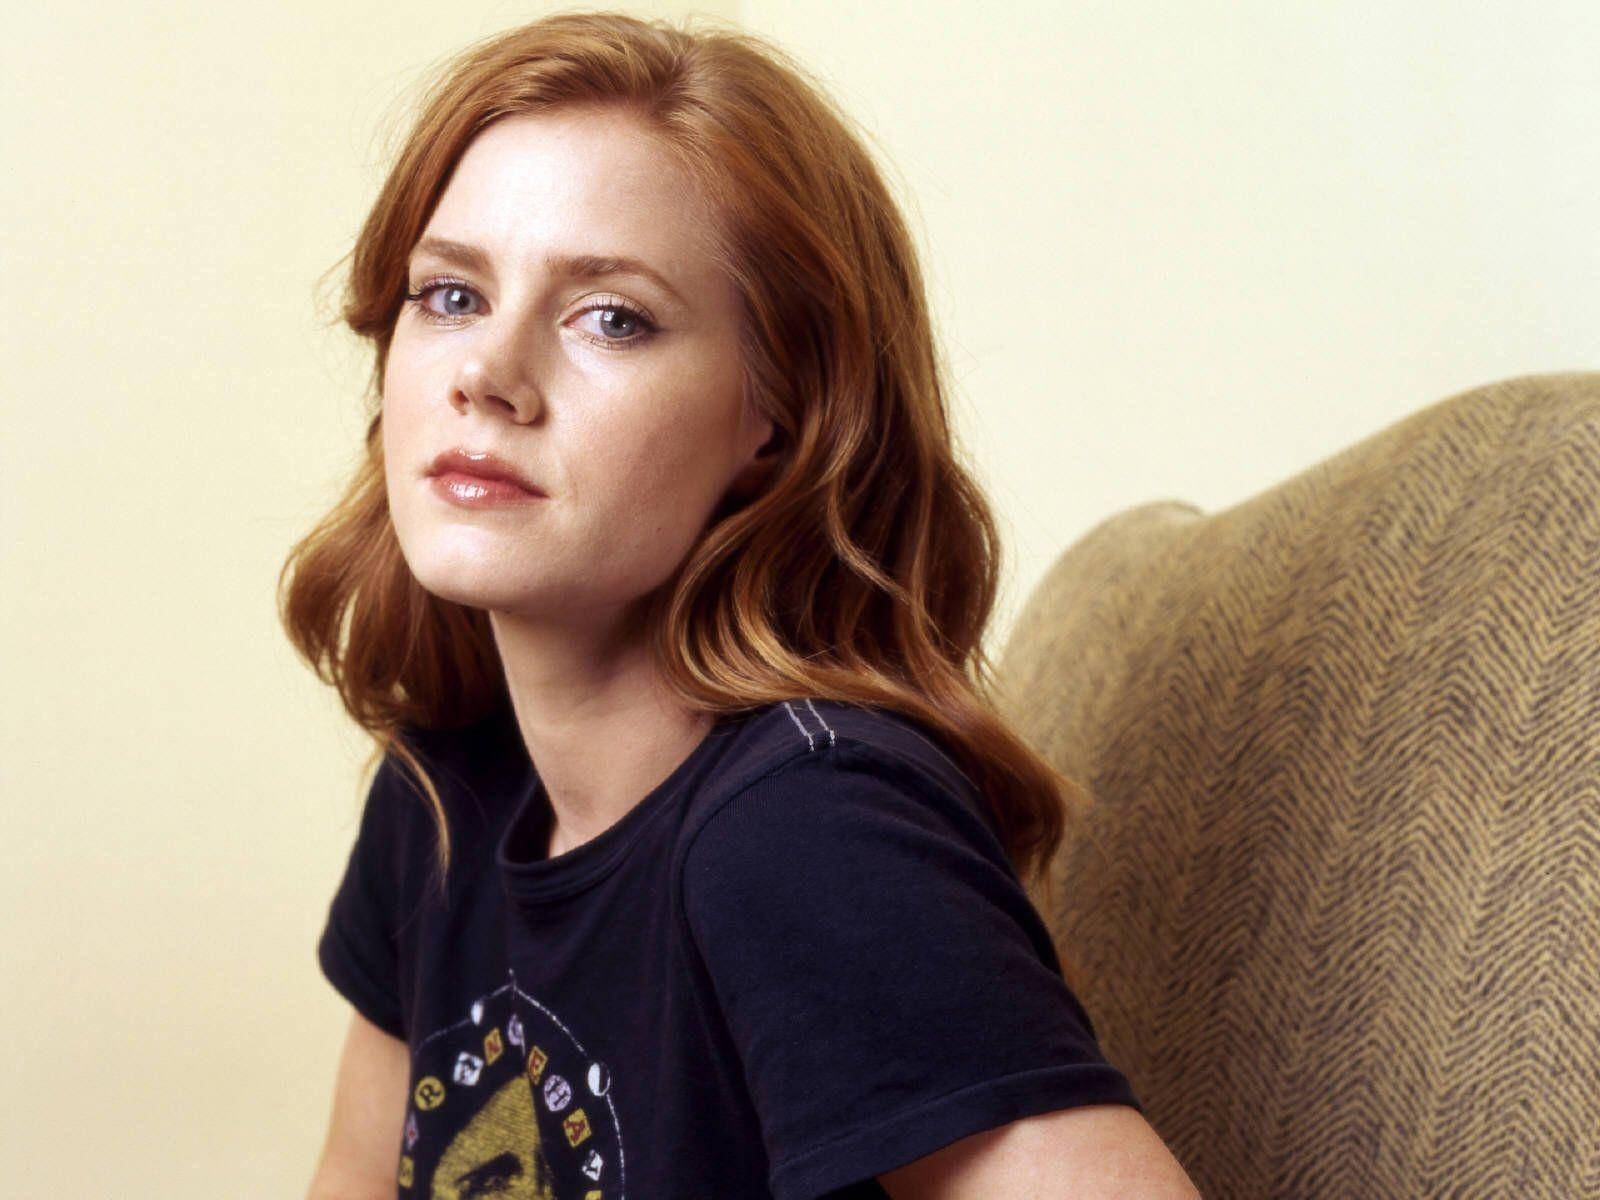 Lovely Photo Of Amy Adams